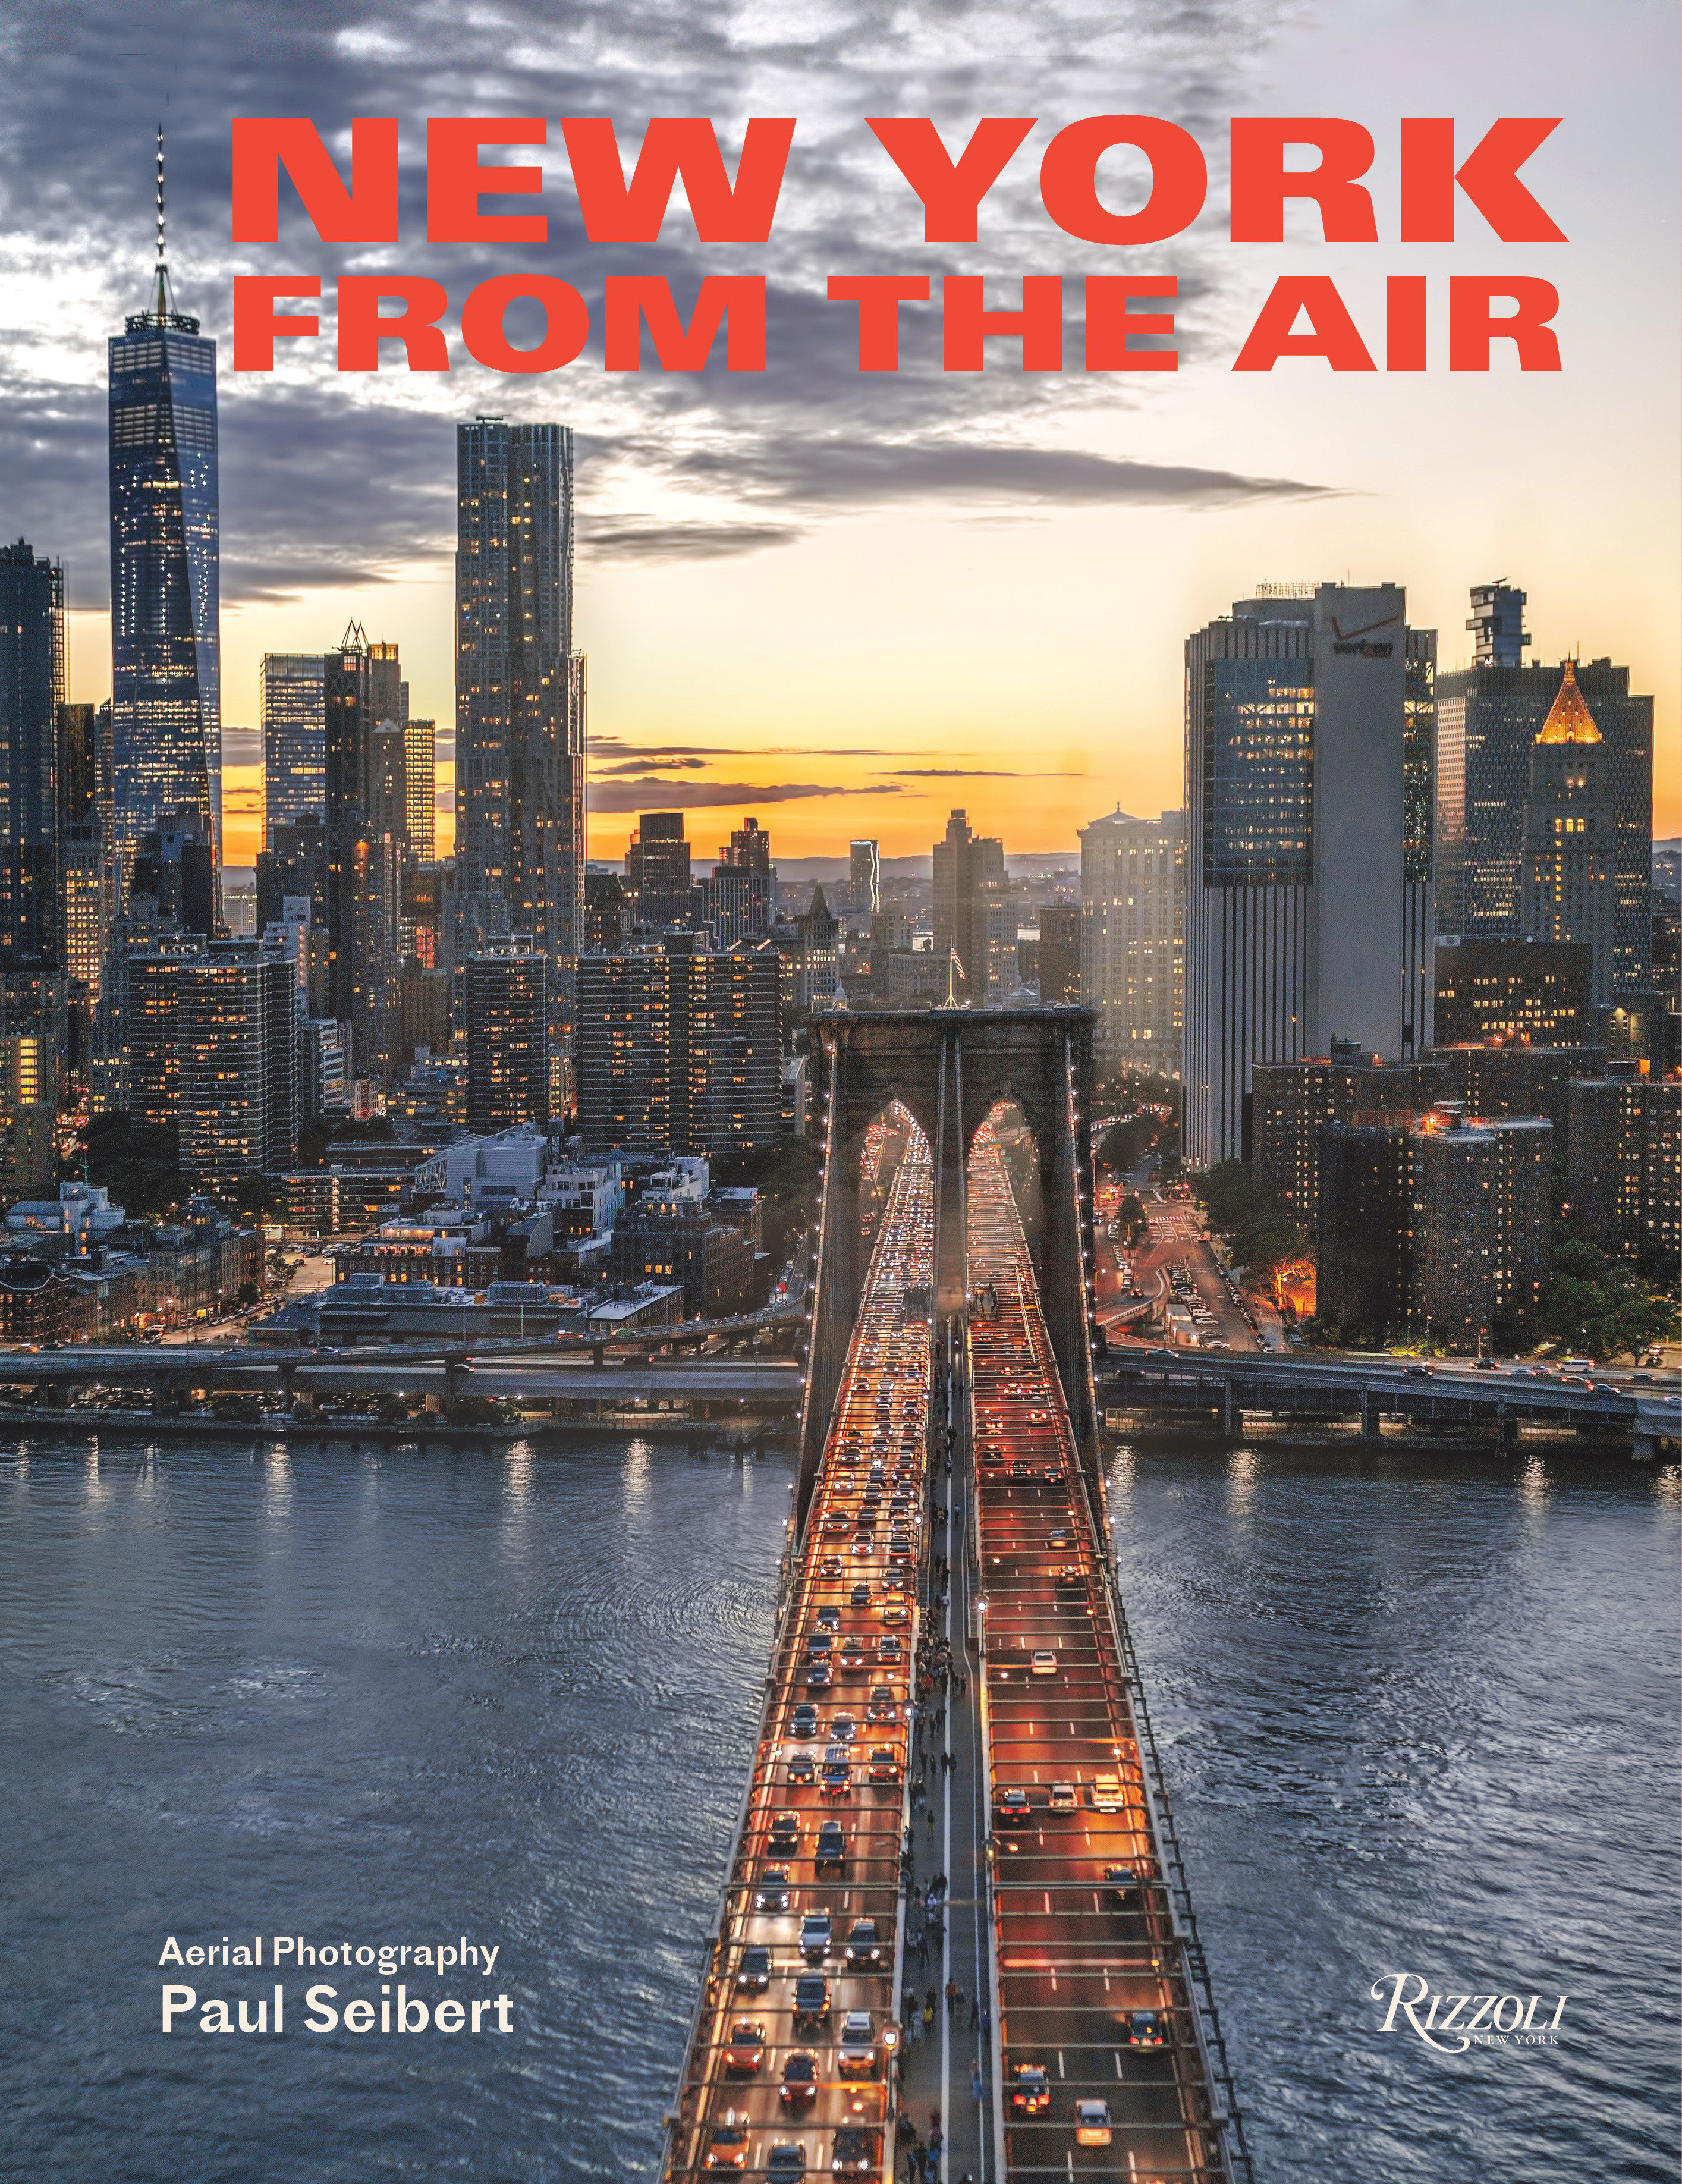 New York From The Air (Hardcover Book)